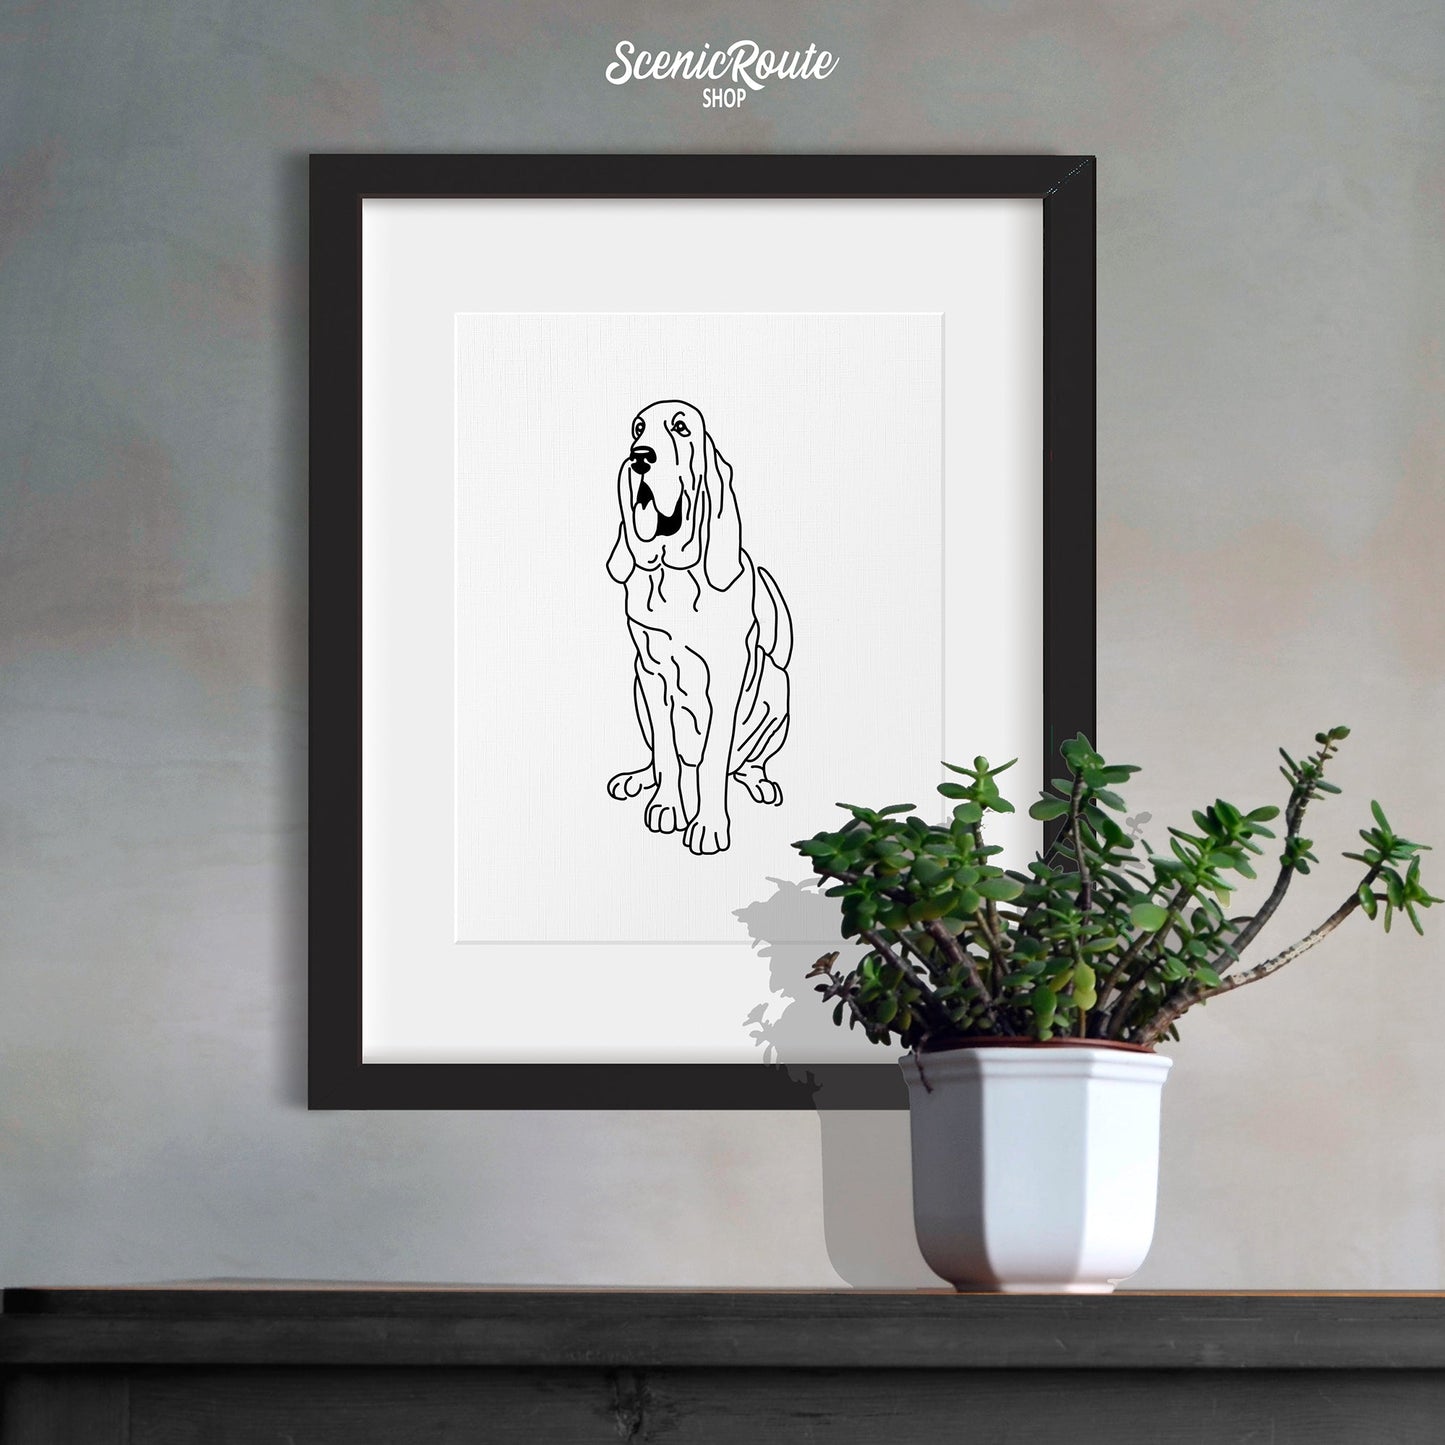 A framed line art drawing of a Bloodhound dog hanging above a gray cabinet with a plant on it